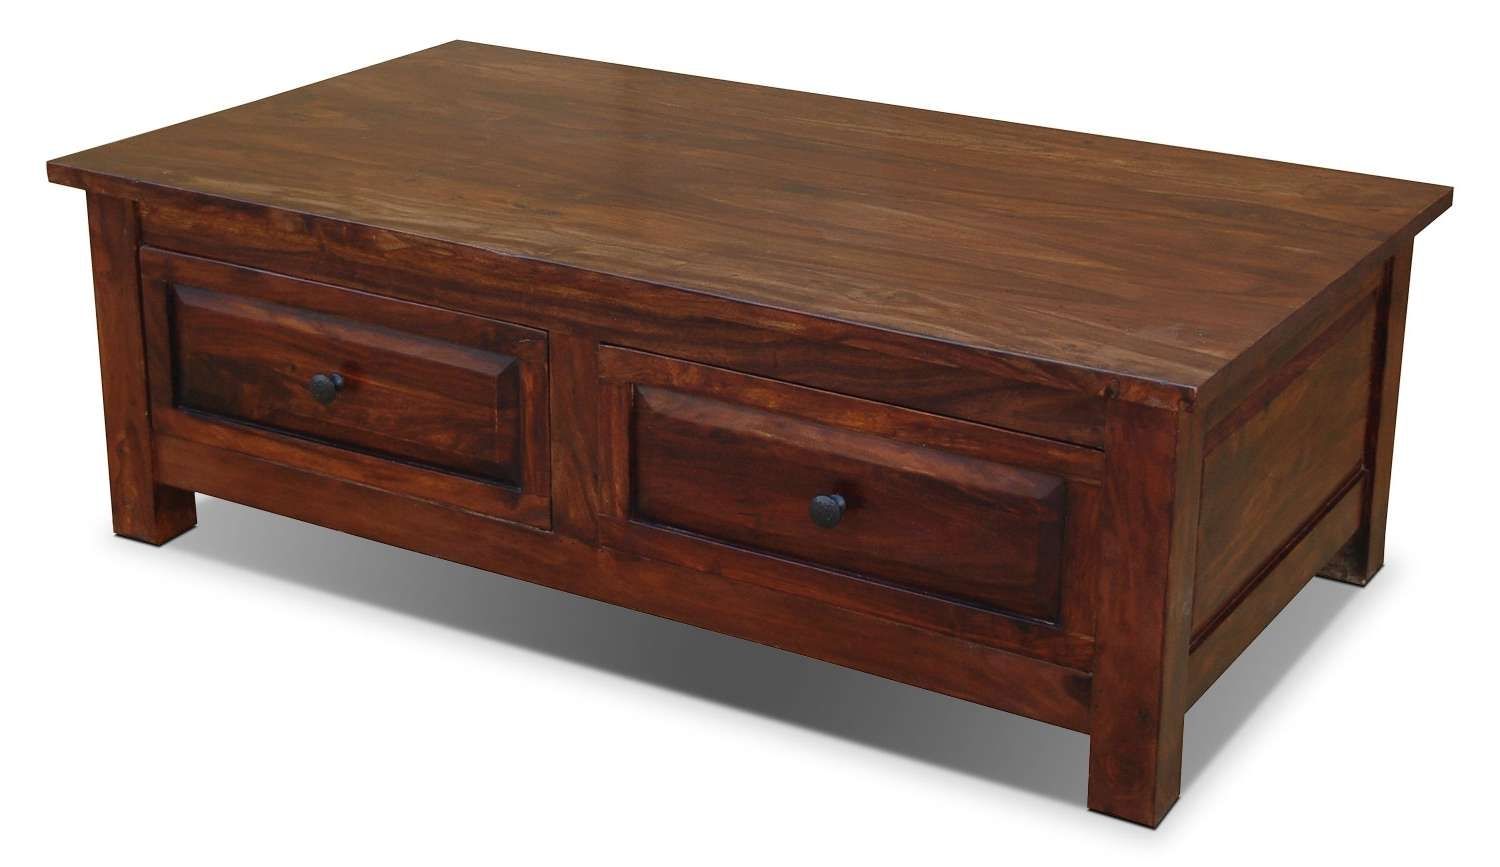 Solid Wood Coffee Table With Storage With Most Current Solid Wood Coffee Tables (View 14 of 20)